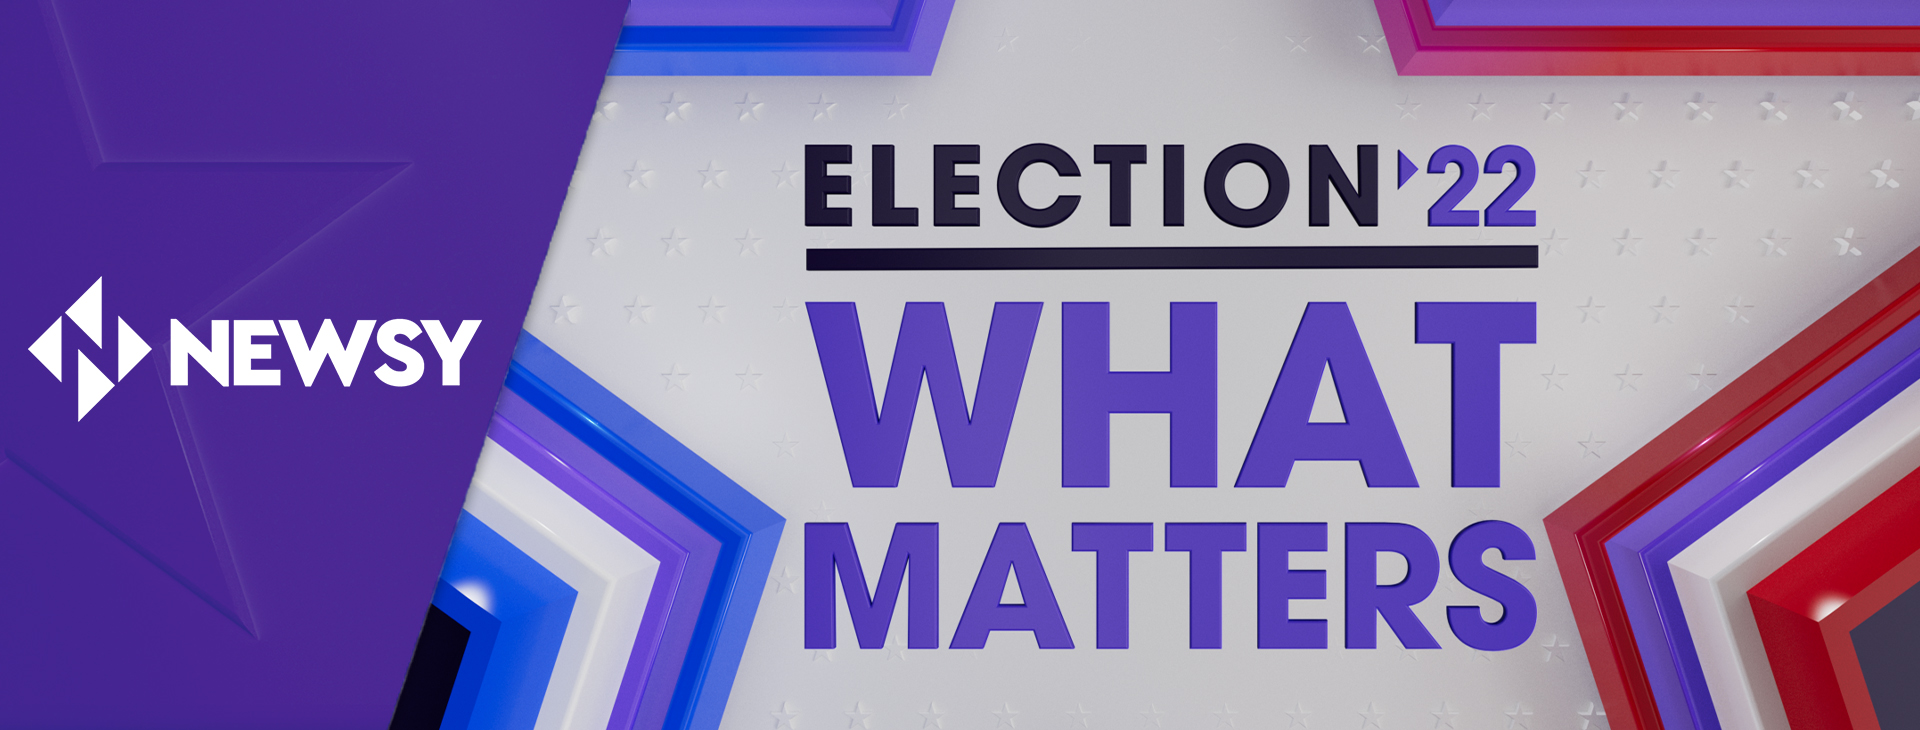 Election '22: What Matters